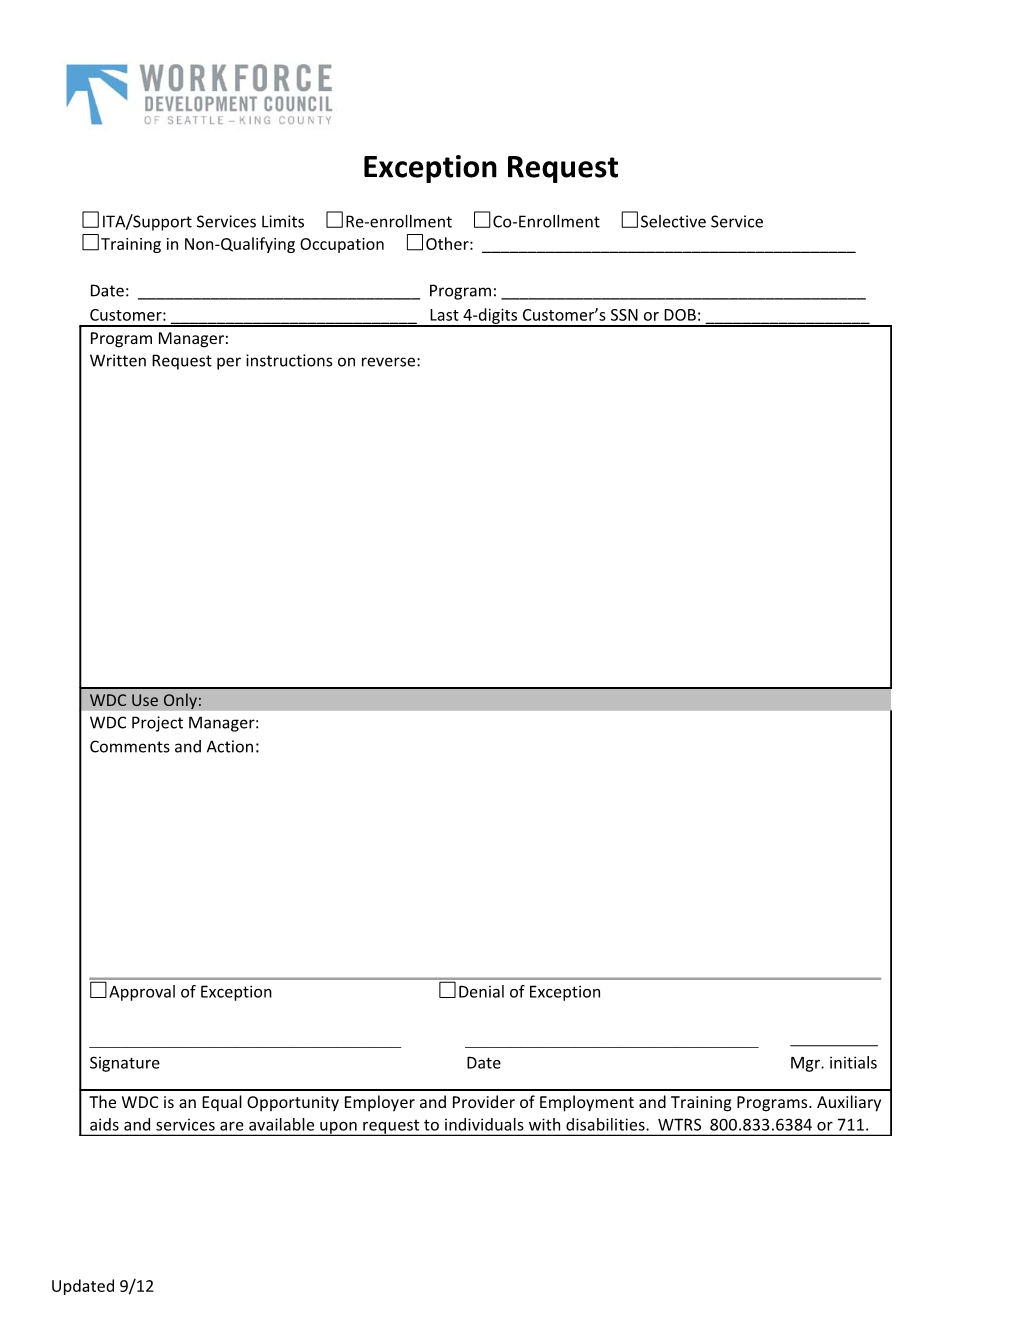 Exception Request Instructions